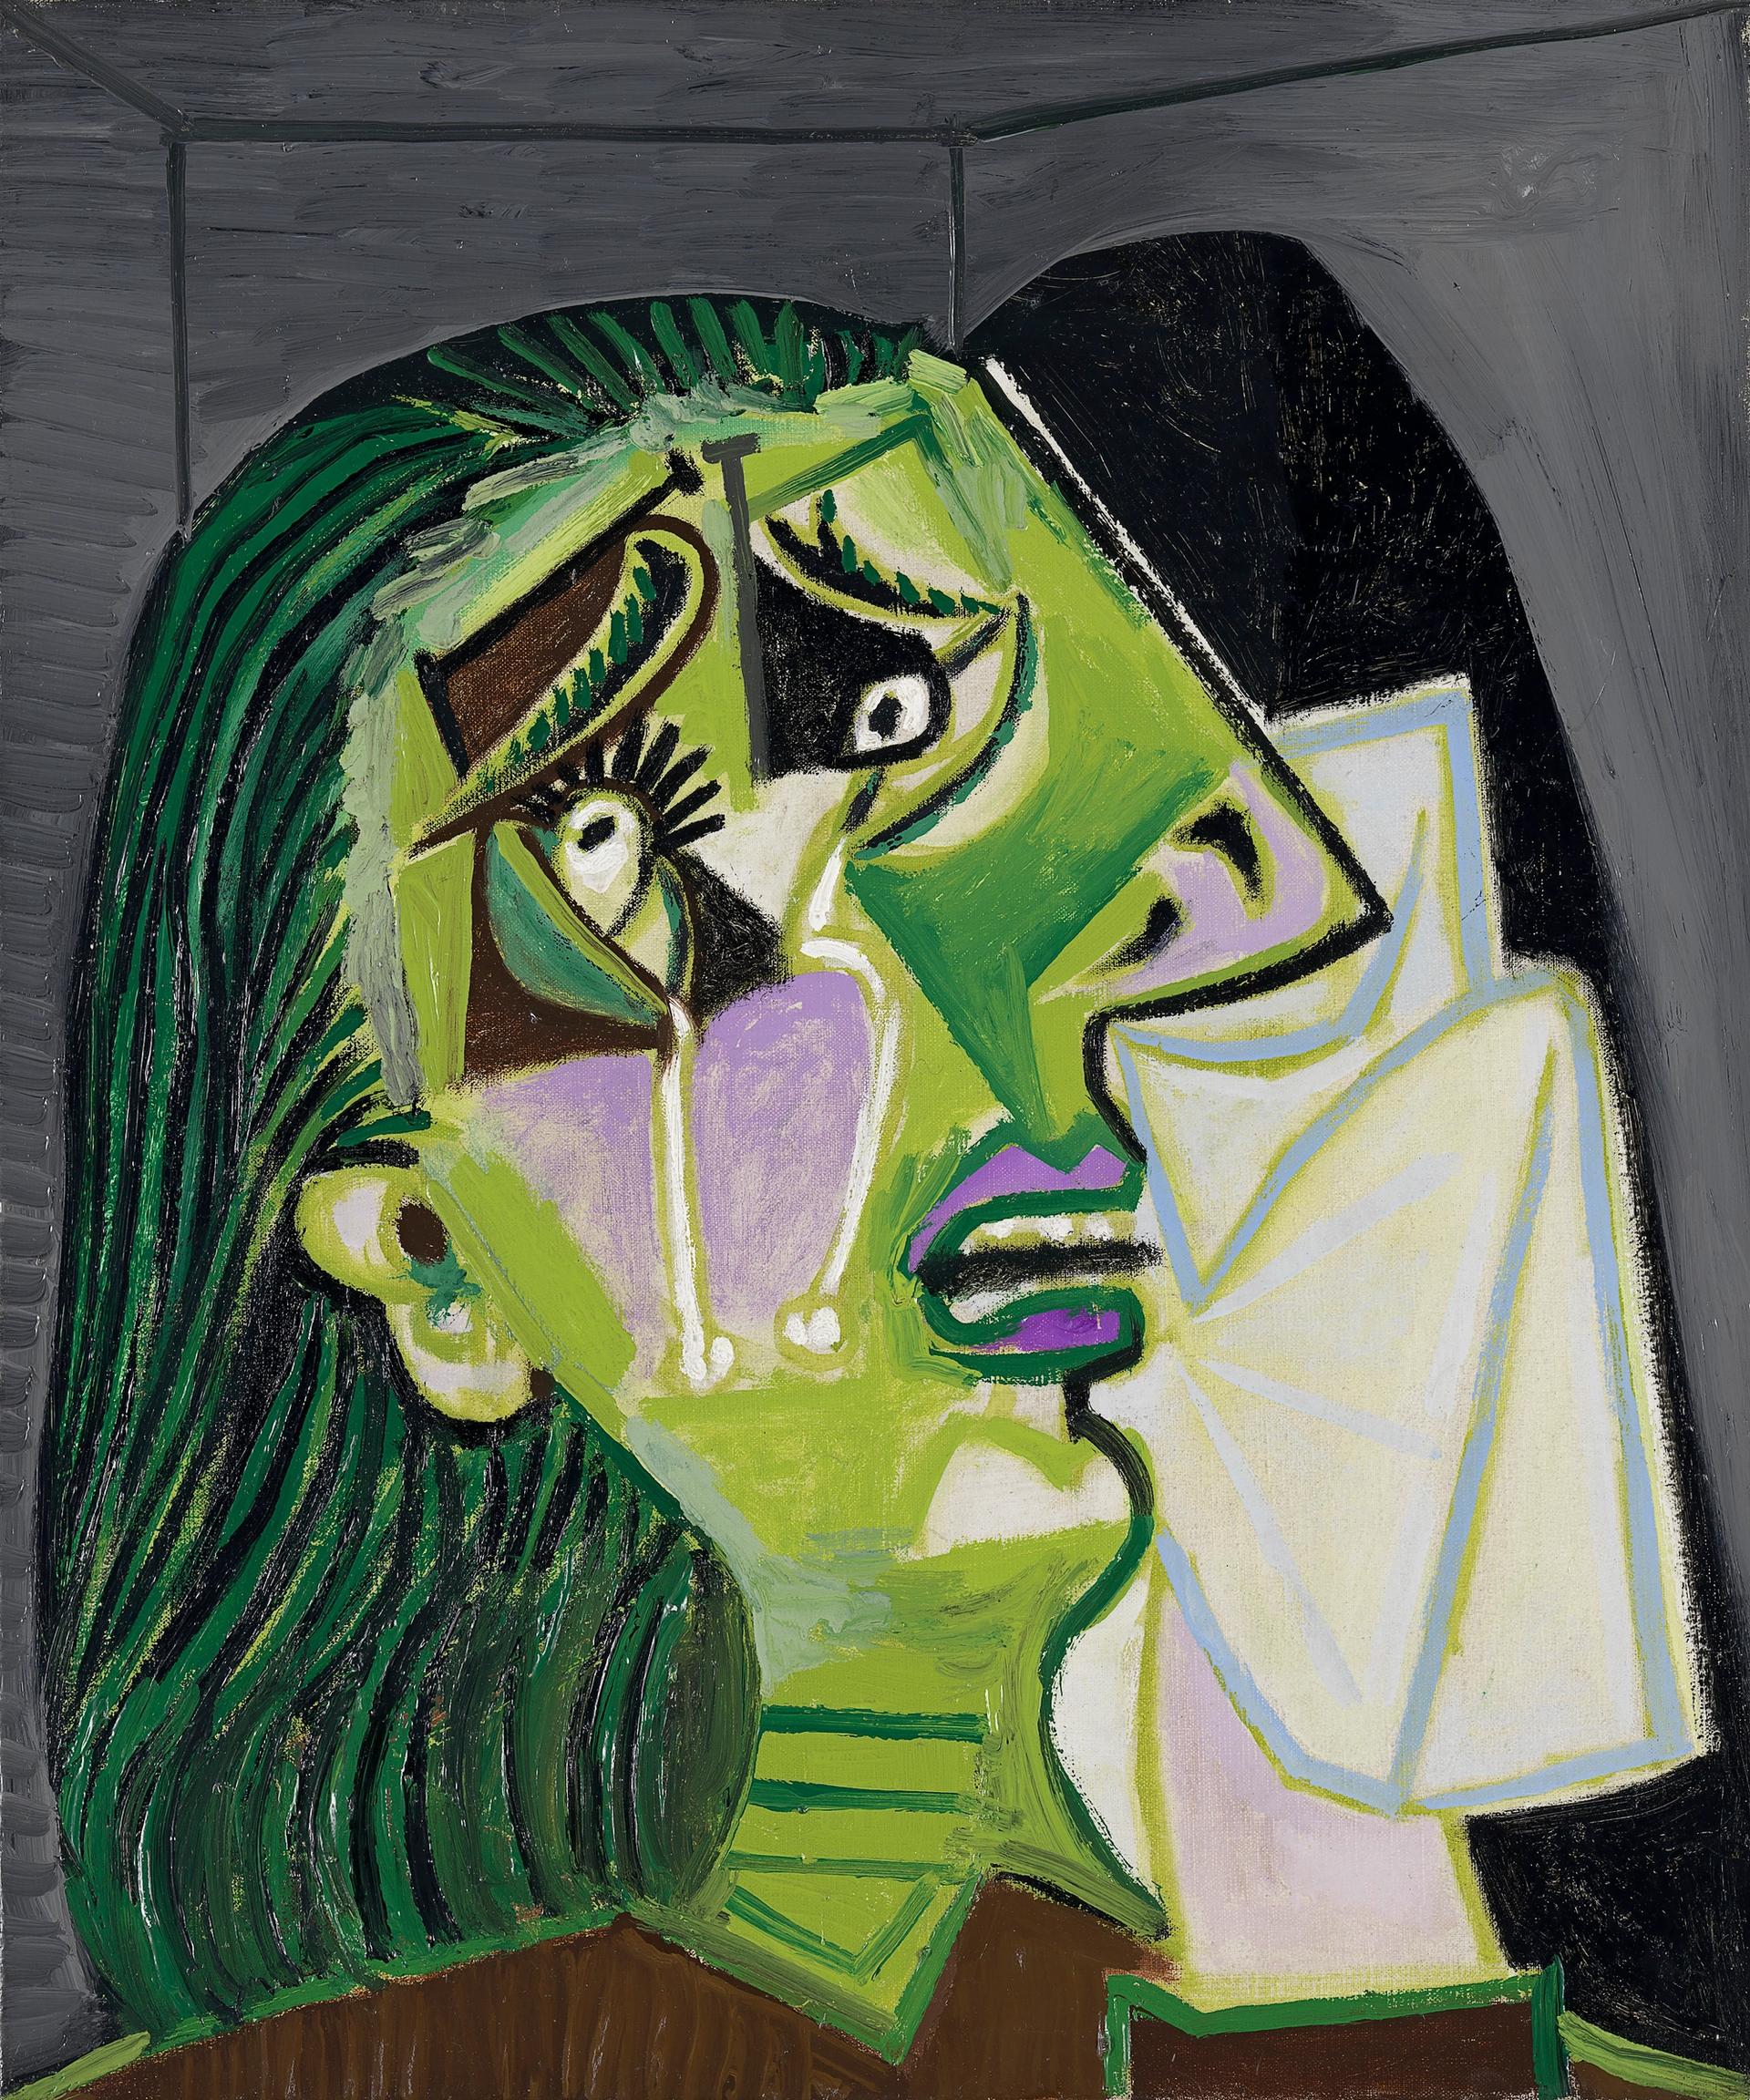 Pablo Picasso's Weeping woman (1937) Image courtesy of the National Gallery of Victoria